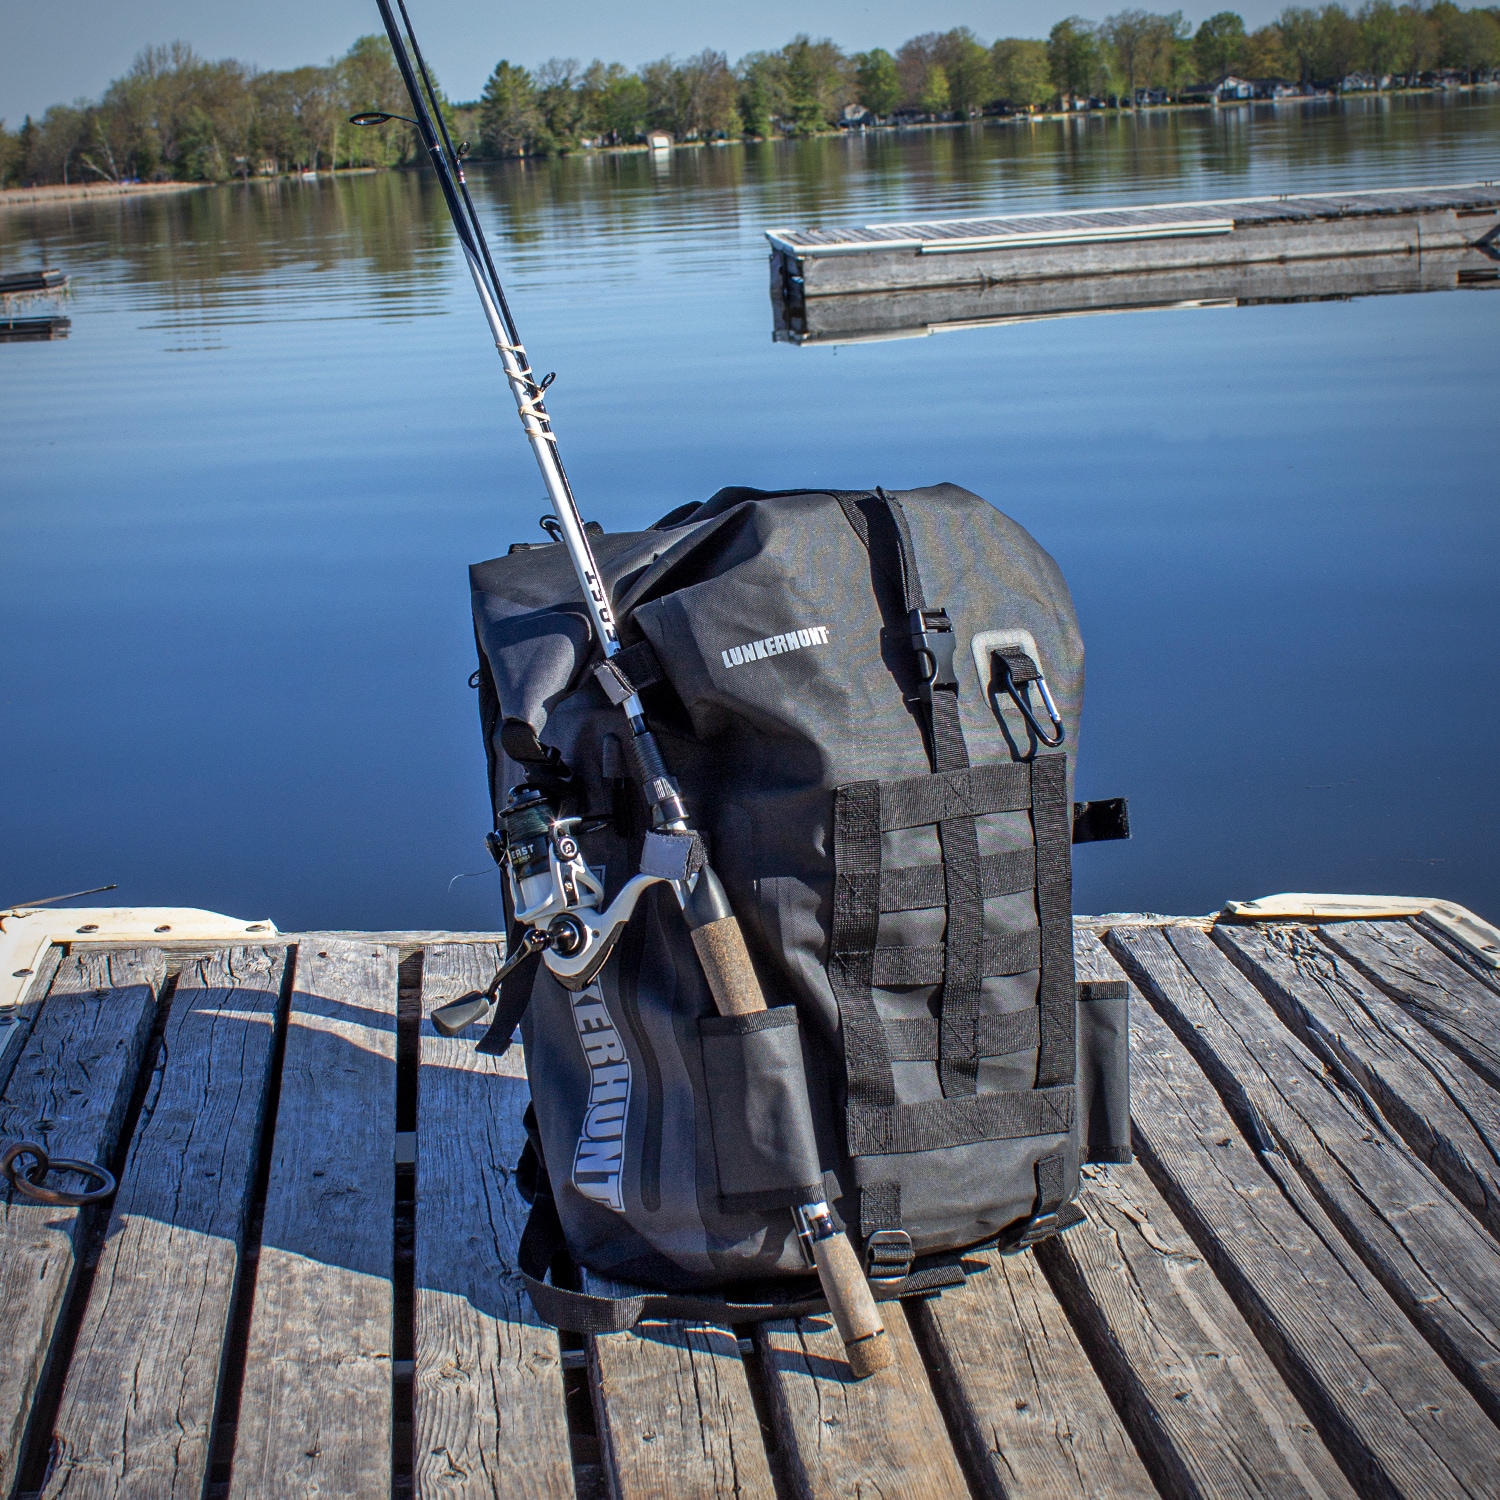 LUNKERHUNT LTS Avid waterproof backpack with 2 tackle trays ...